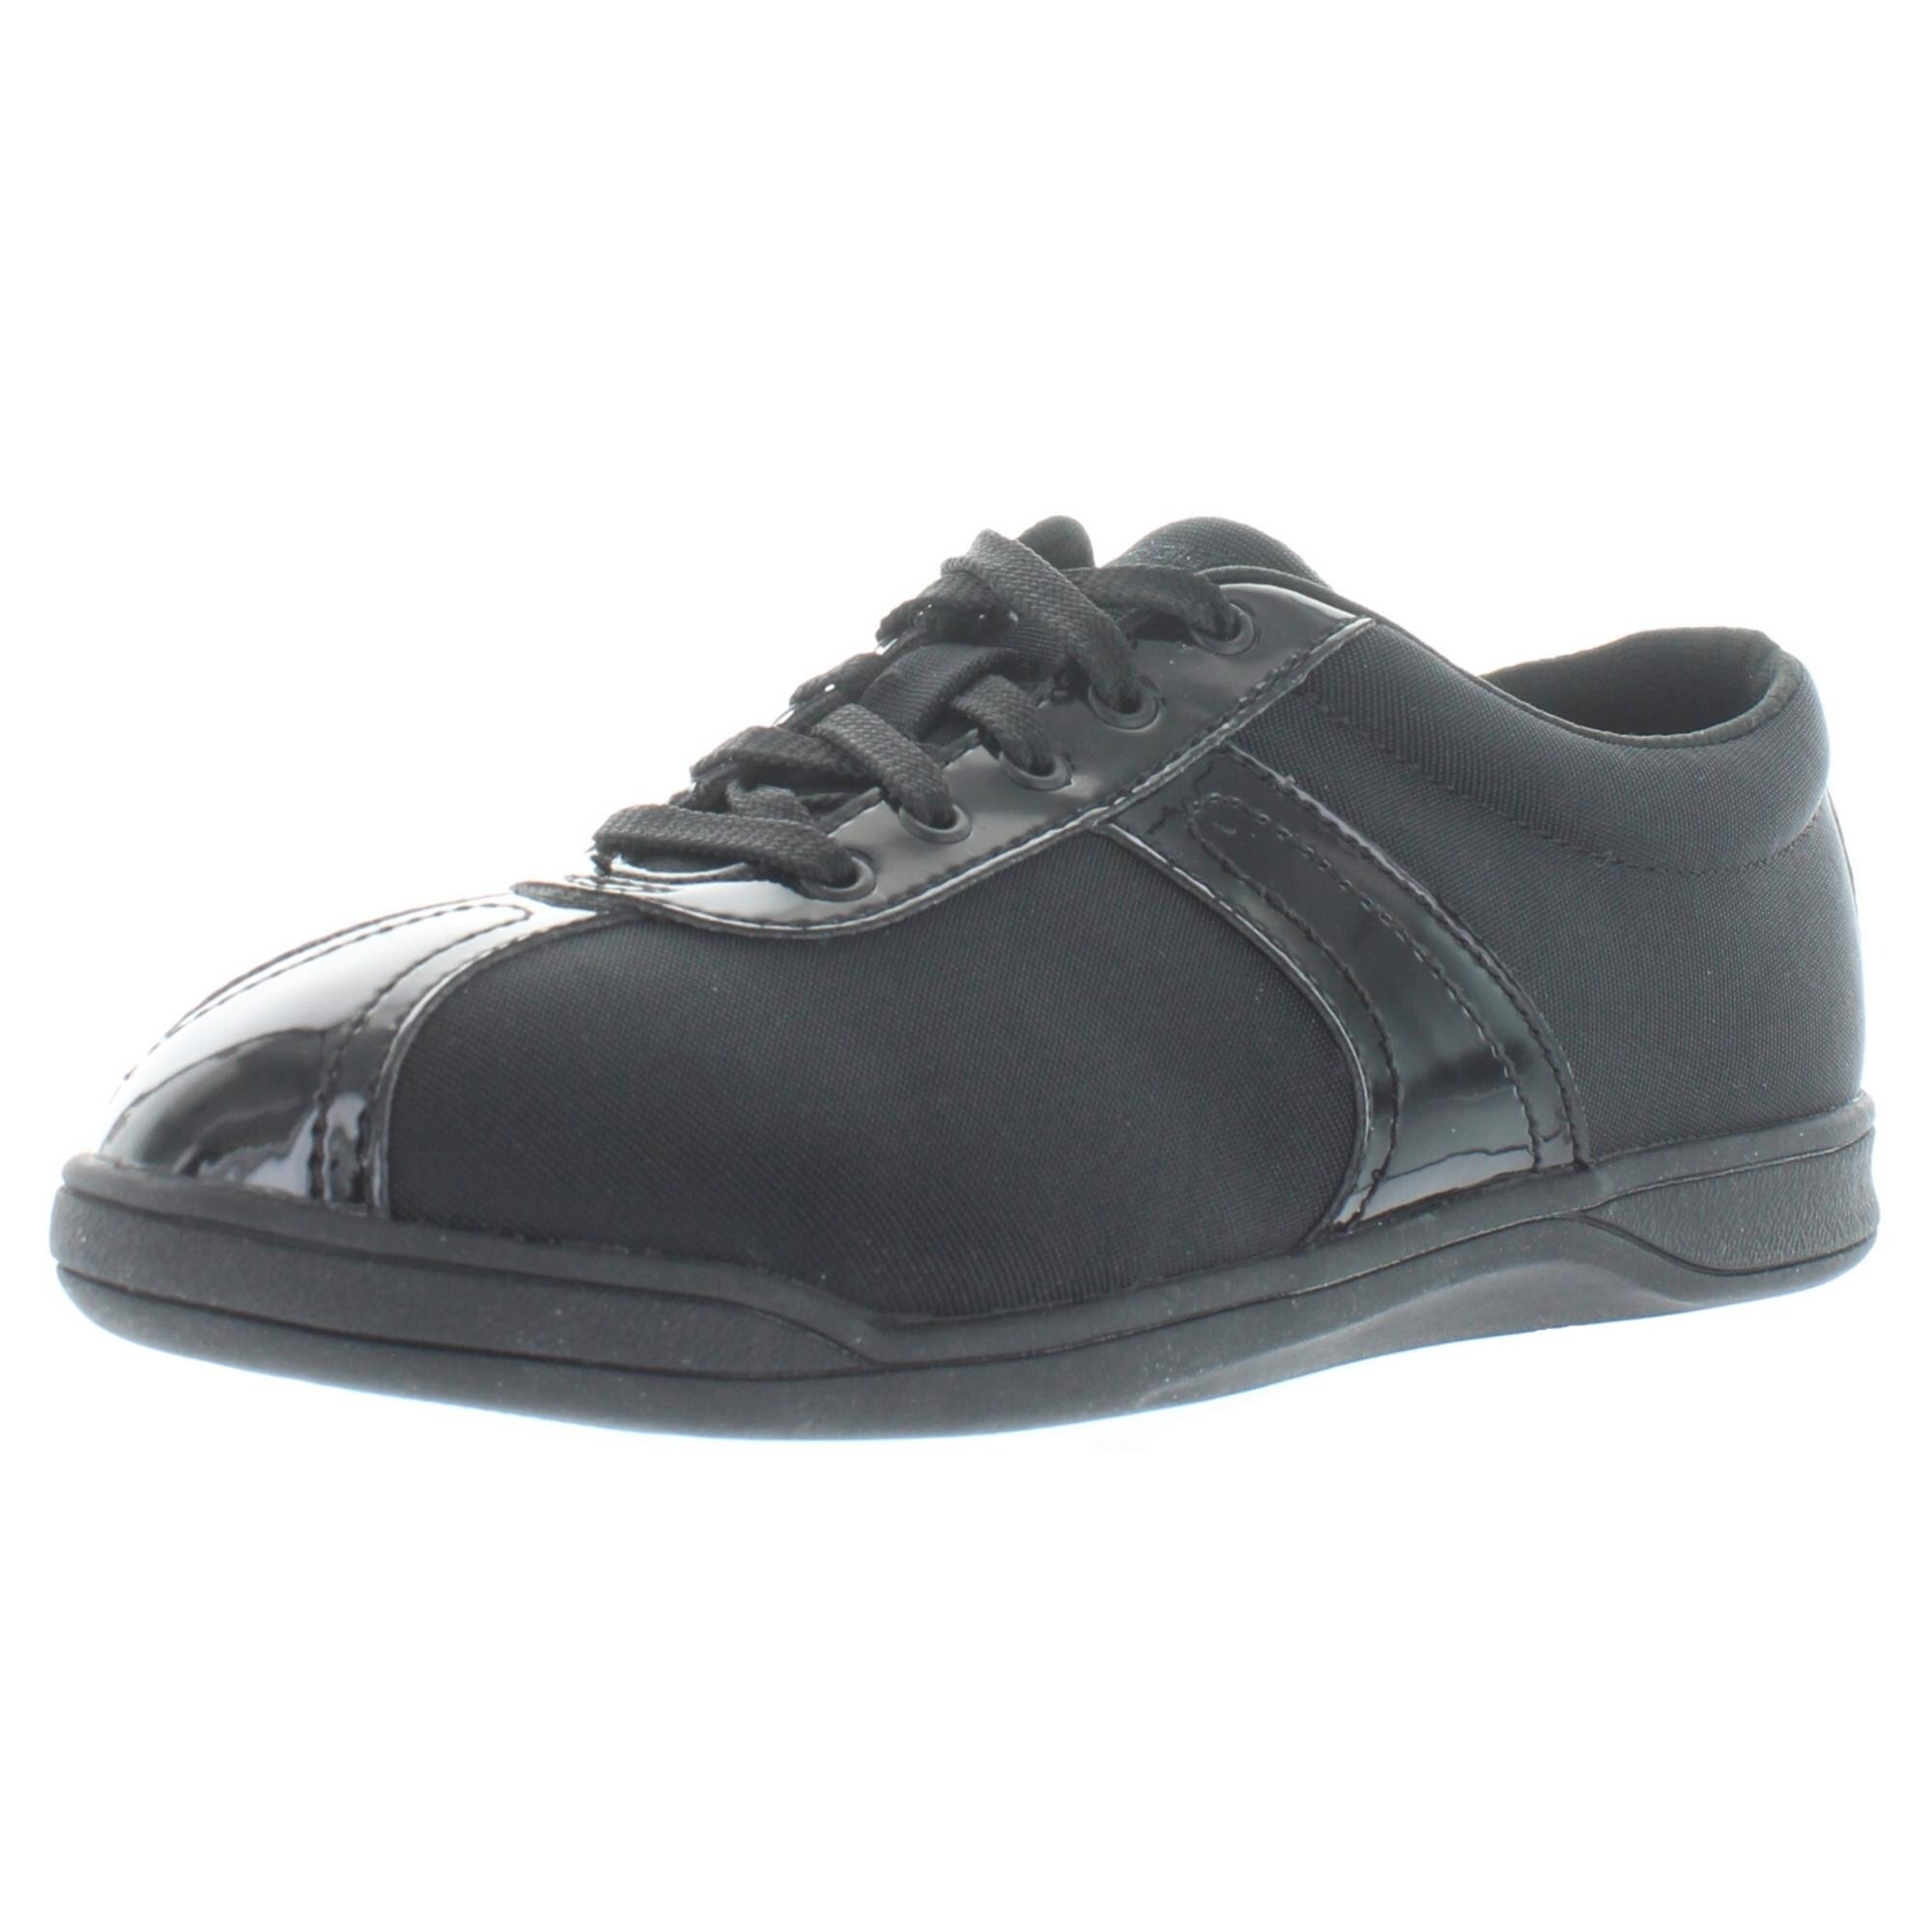 Athletic Shoes Lace-Up Casual - Black 